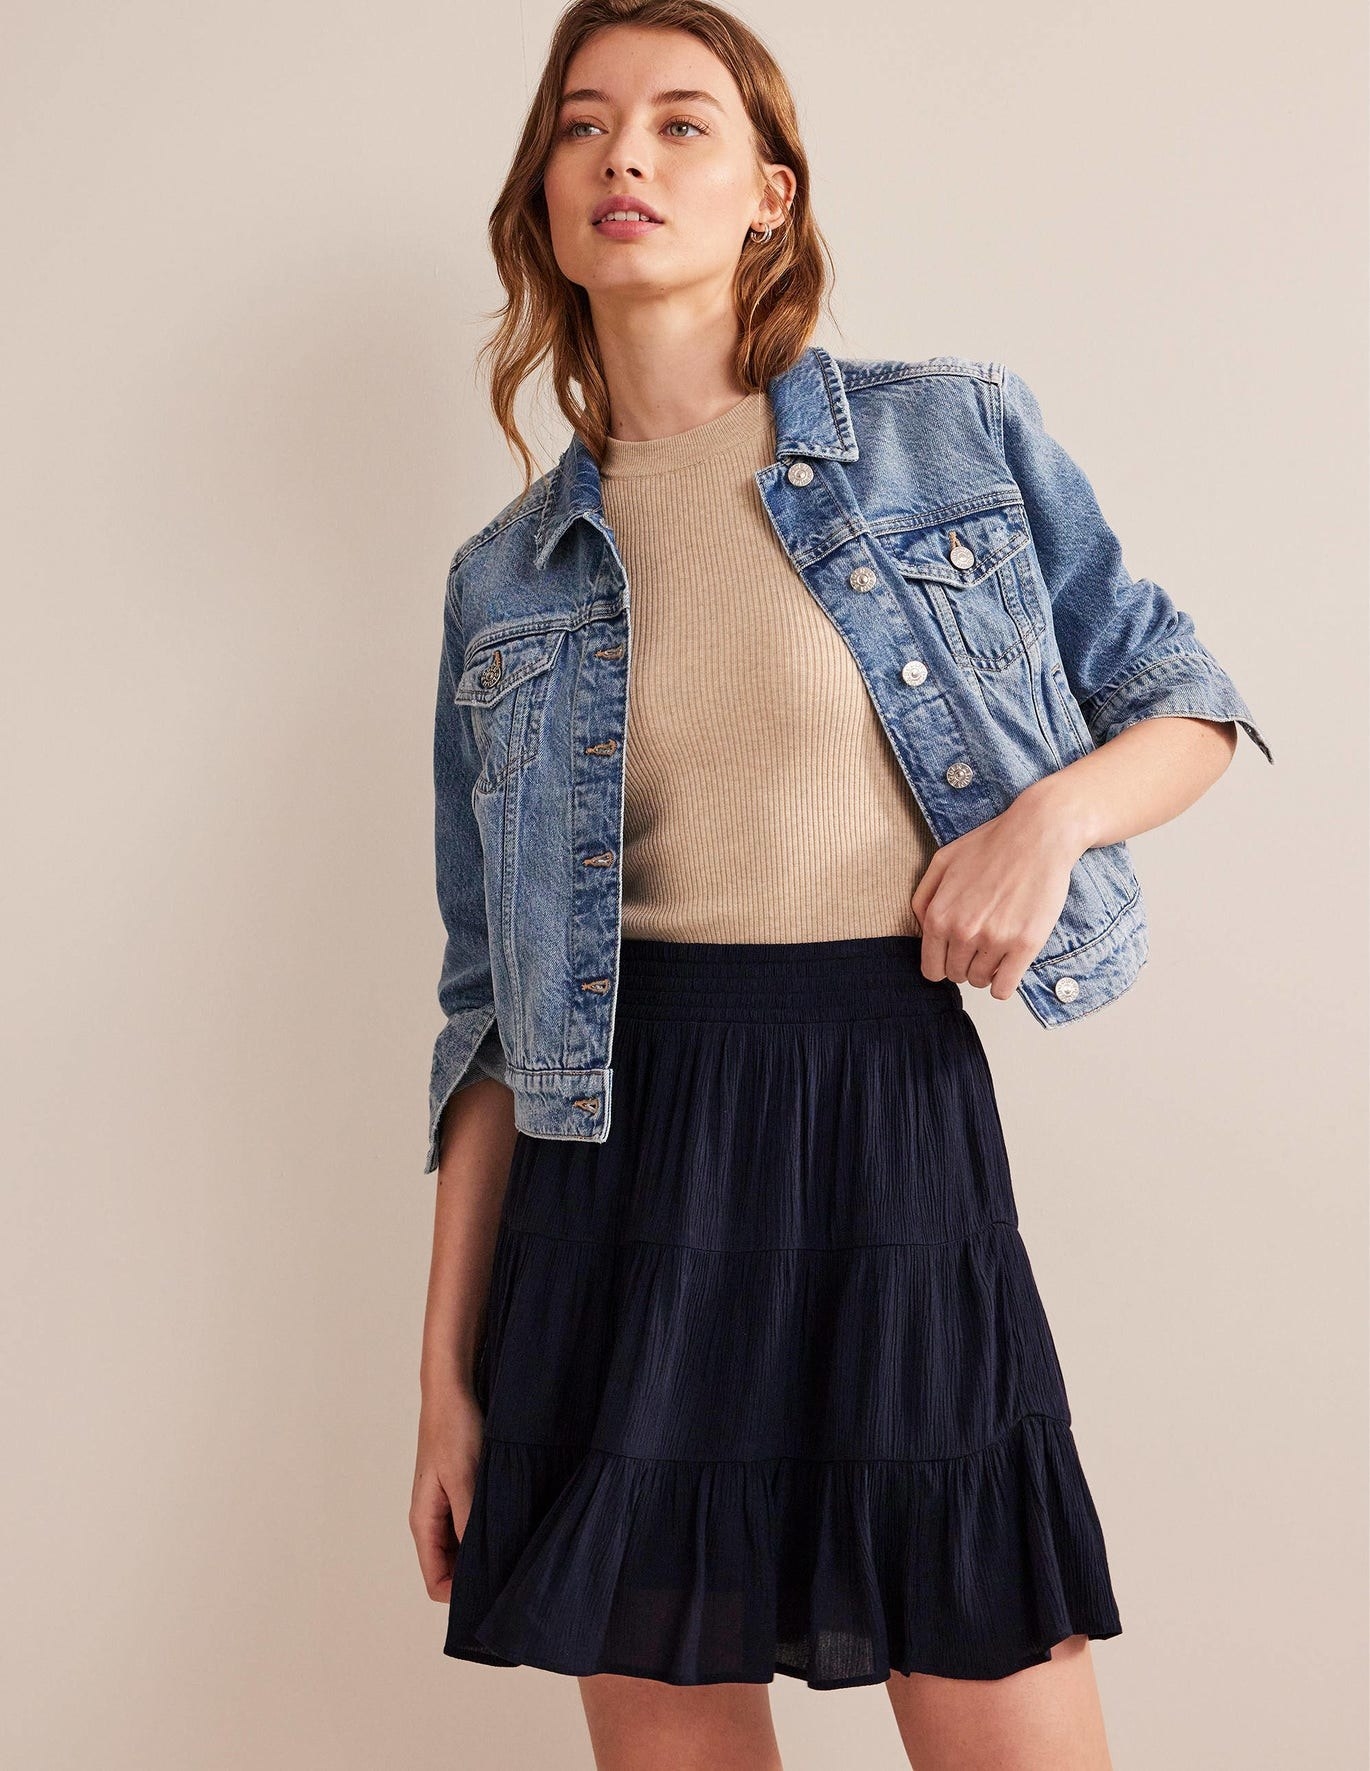 model in navy blue tiered mid-thigh length flowy skirt